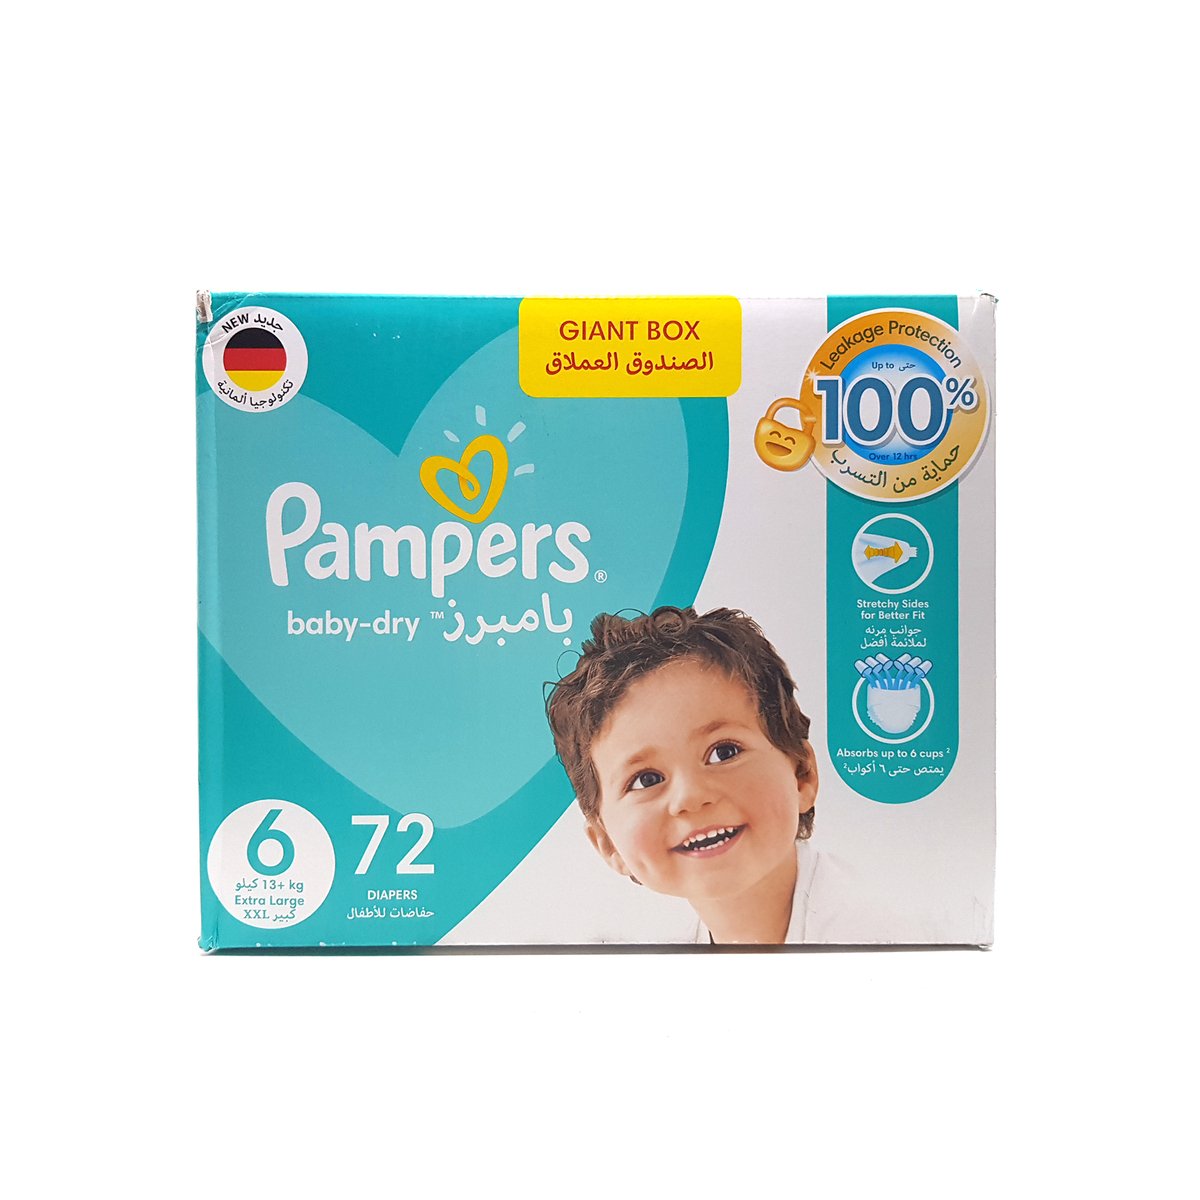 Pampers Baby-Dry Diapers No.6 Giant Box 13+kg 72pcs